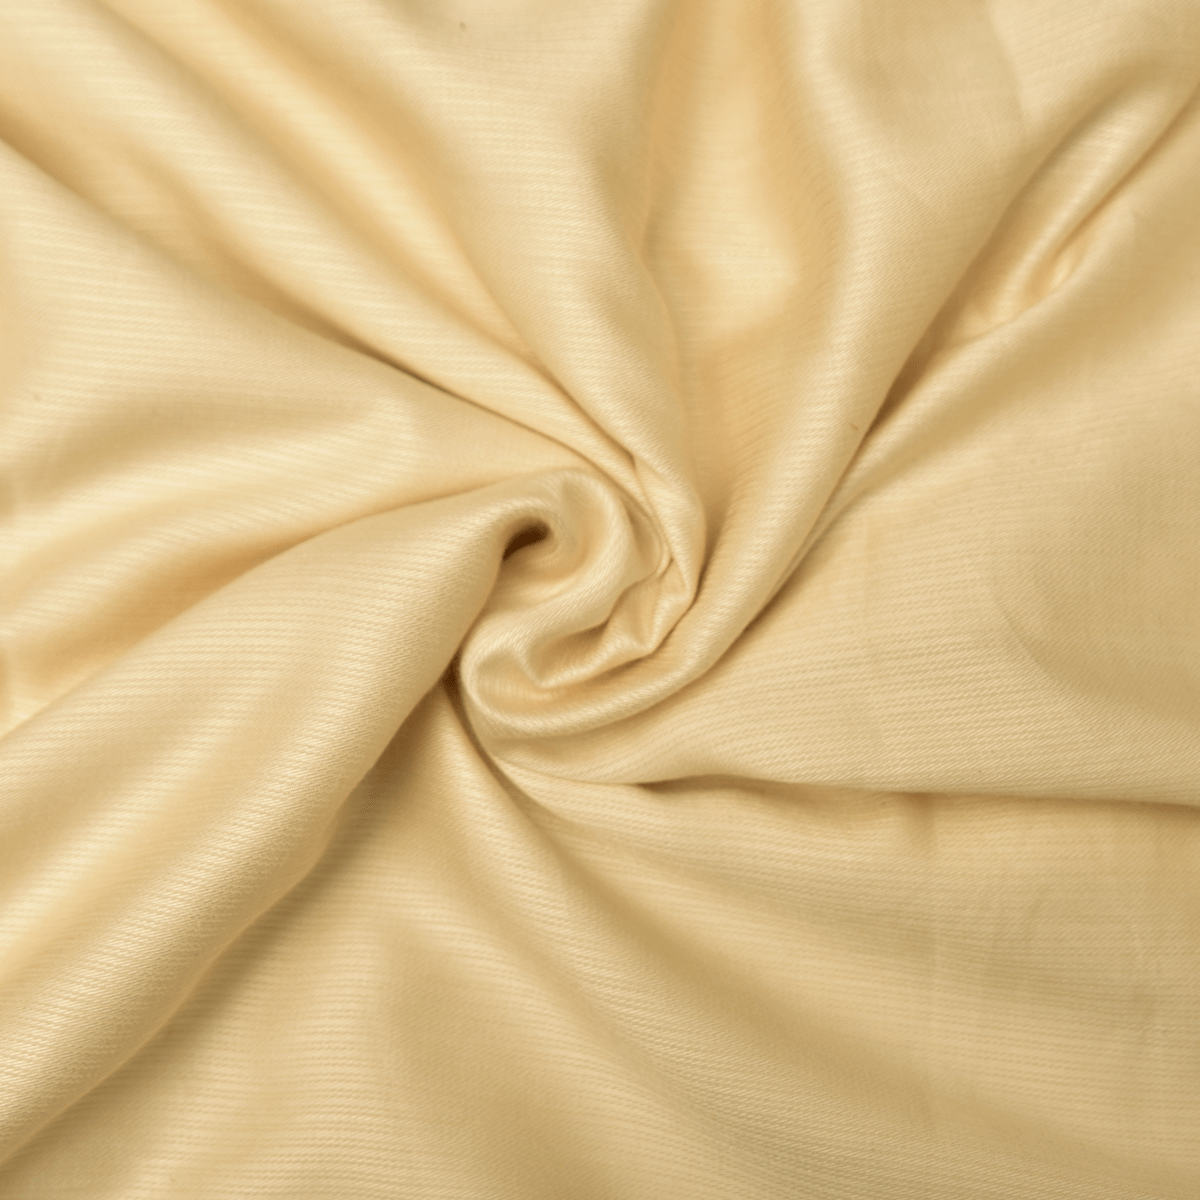 Dyed Cotail Linen-MDDY0003495